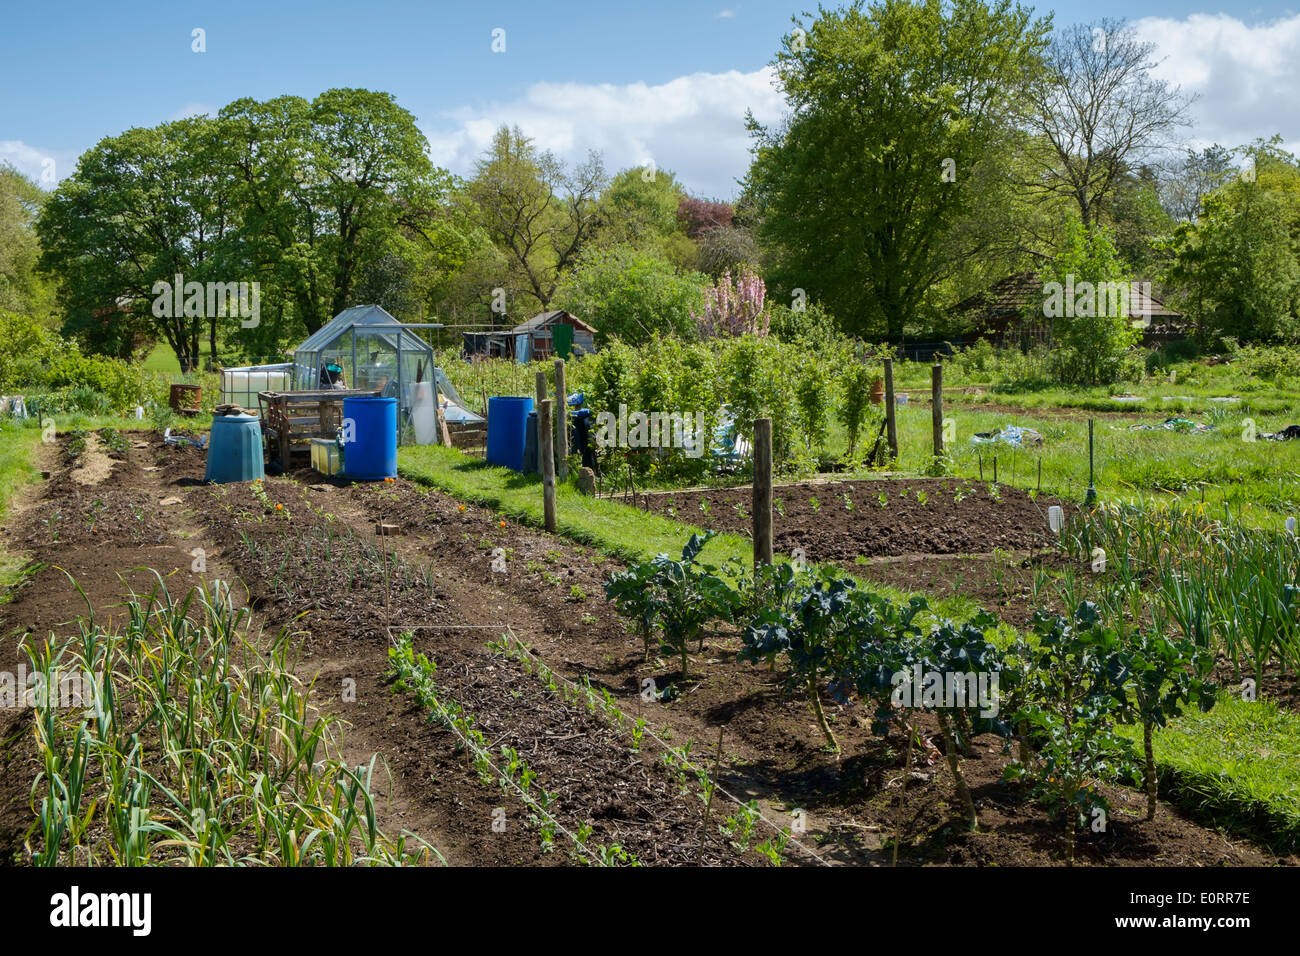 Growing vegetables on Allotments, England, UK Stock Photo